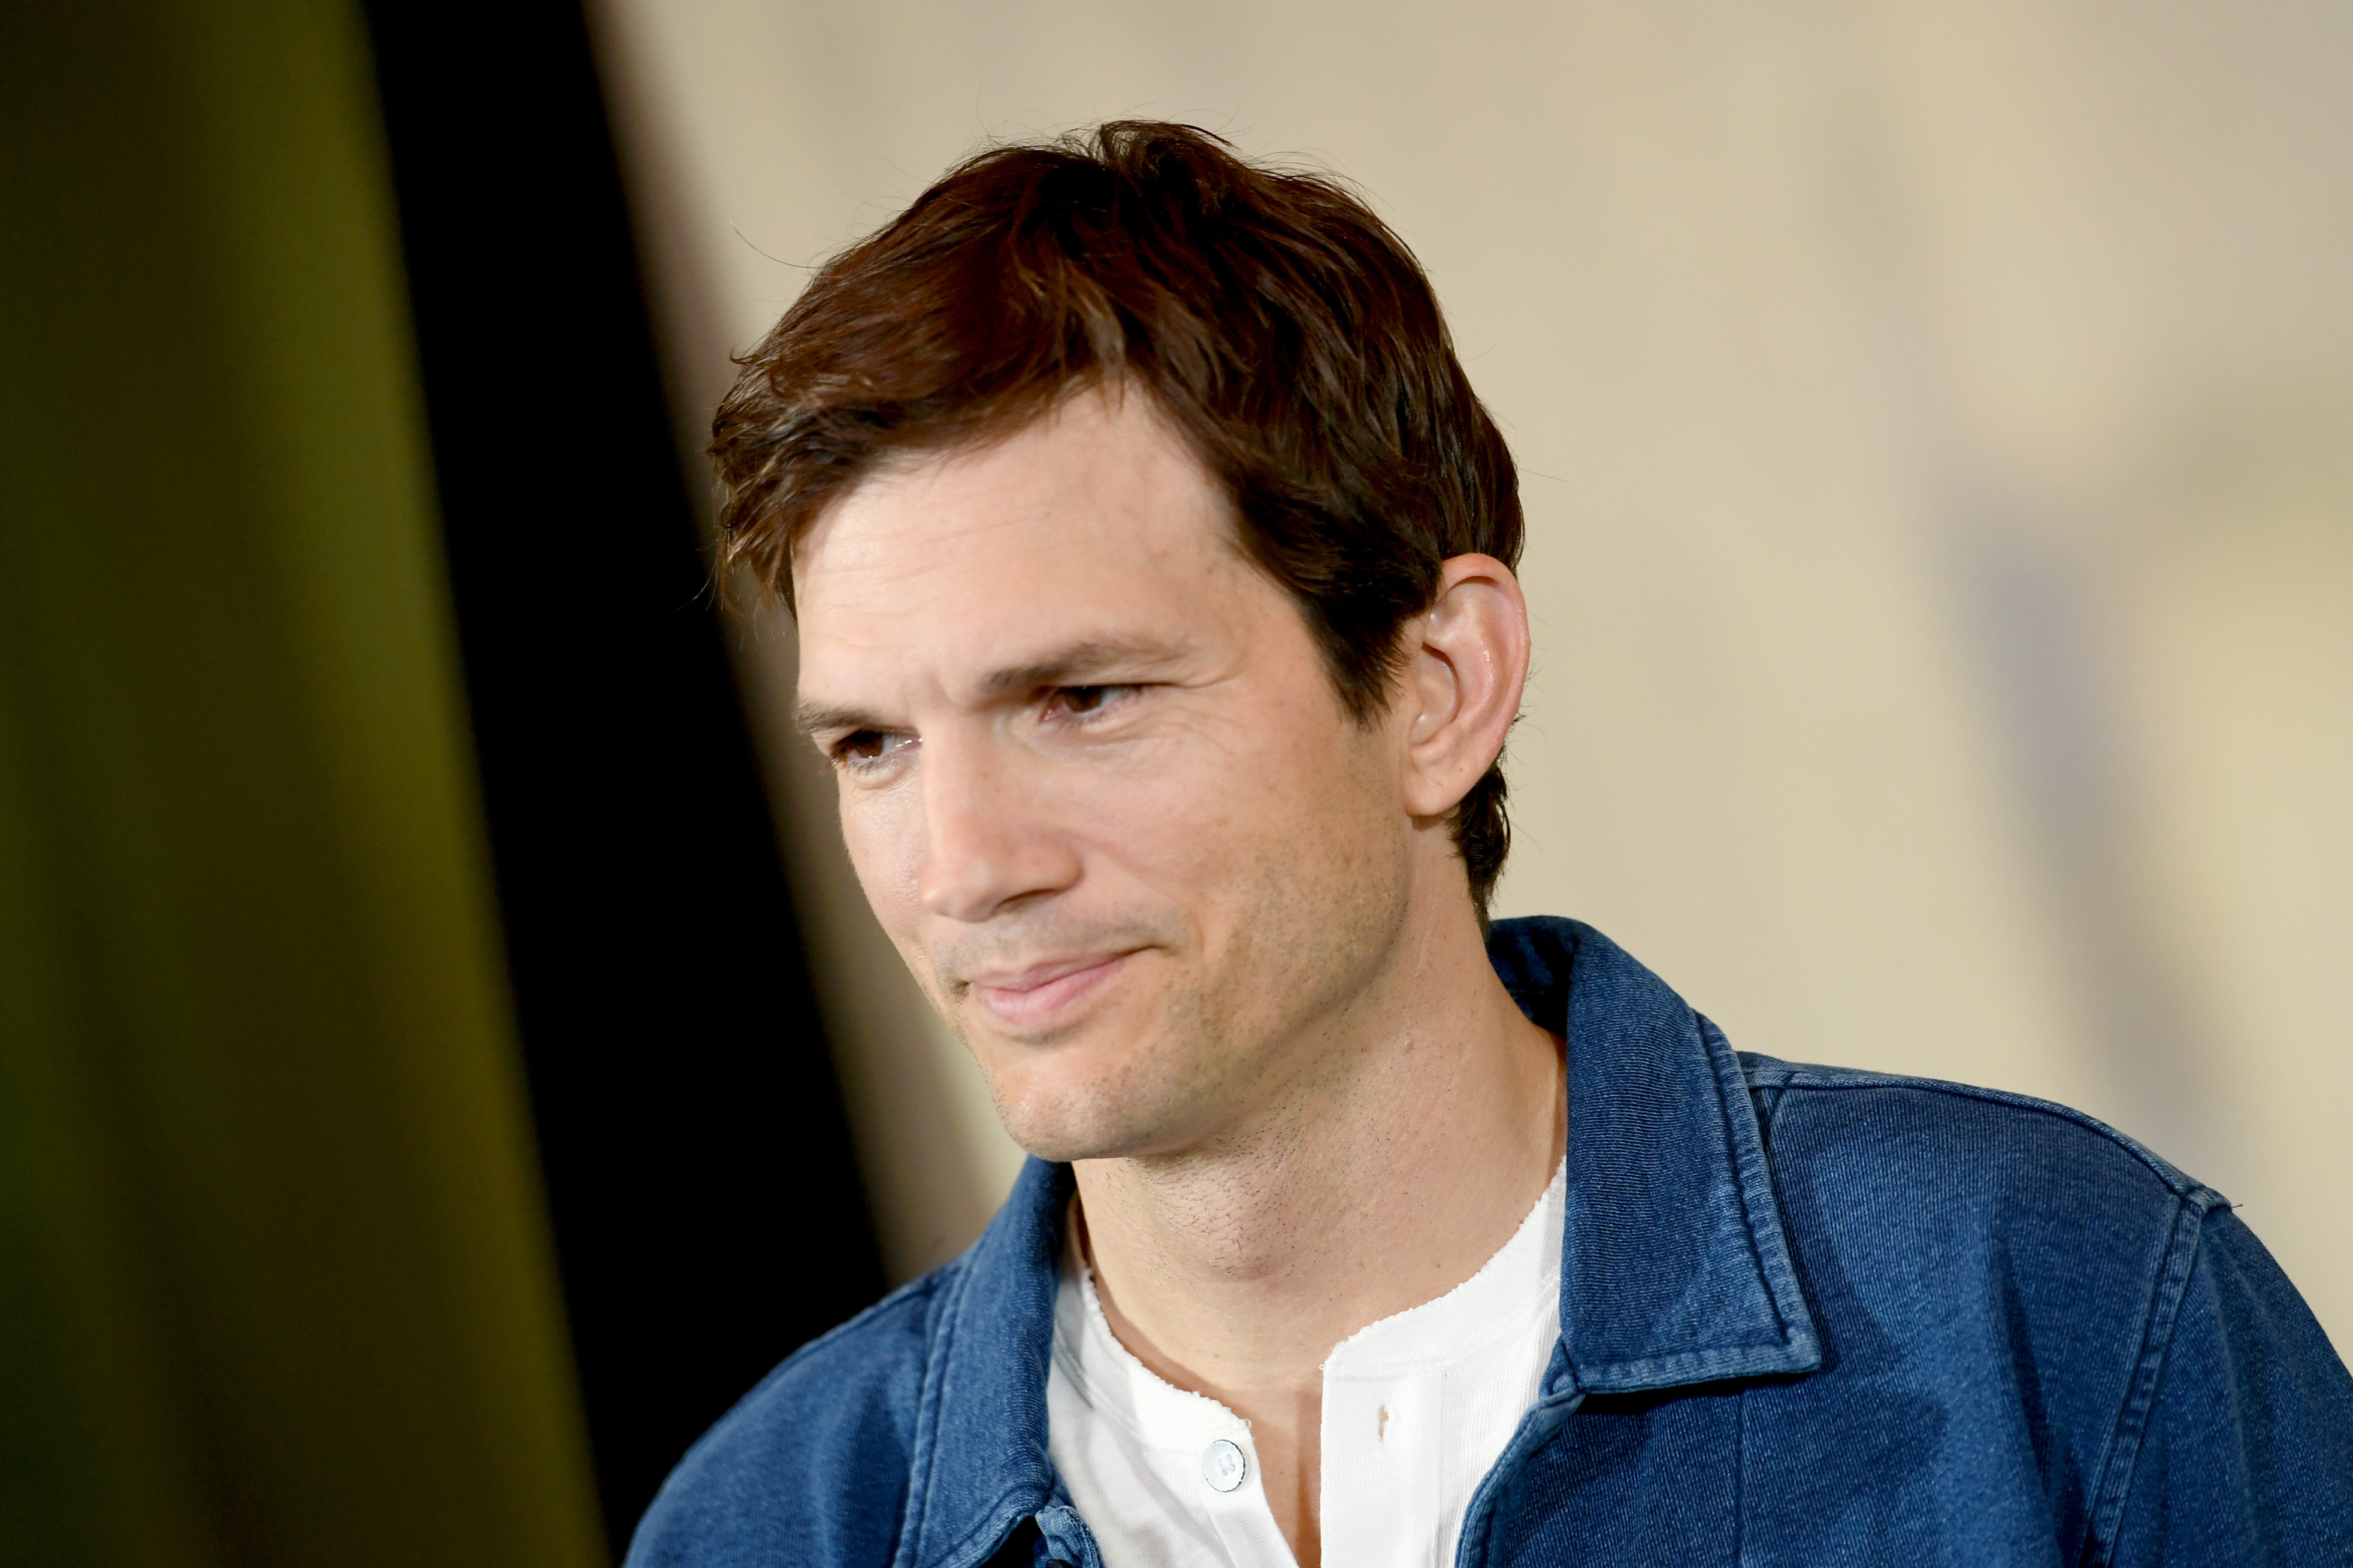 Ashton Kutcher at the "Your Place Or Mine" photocall on January 30, 2023, in Los Angeles, California. | Source: Getty Images